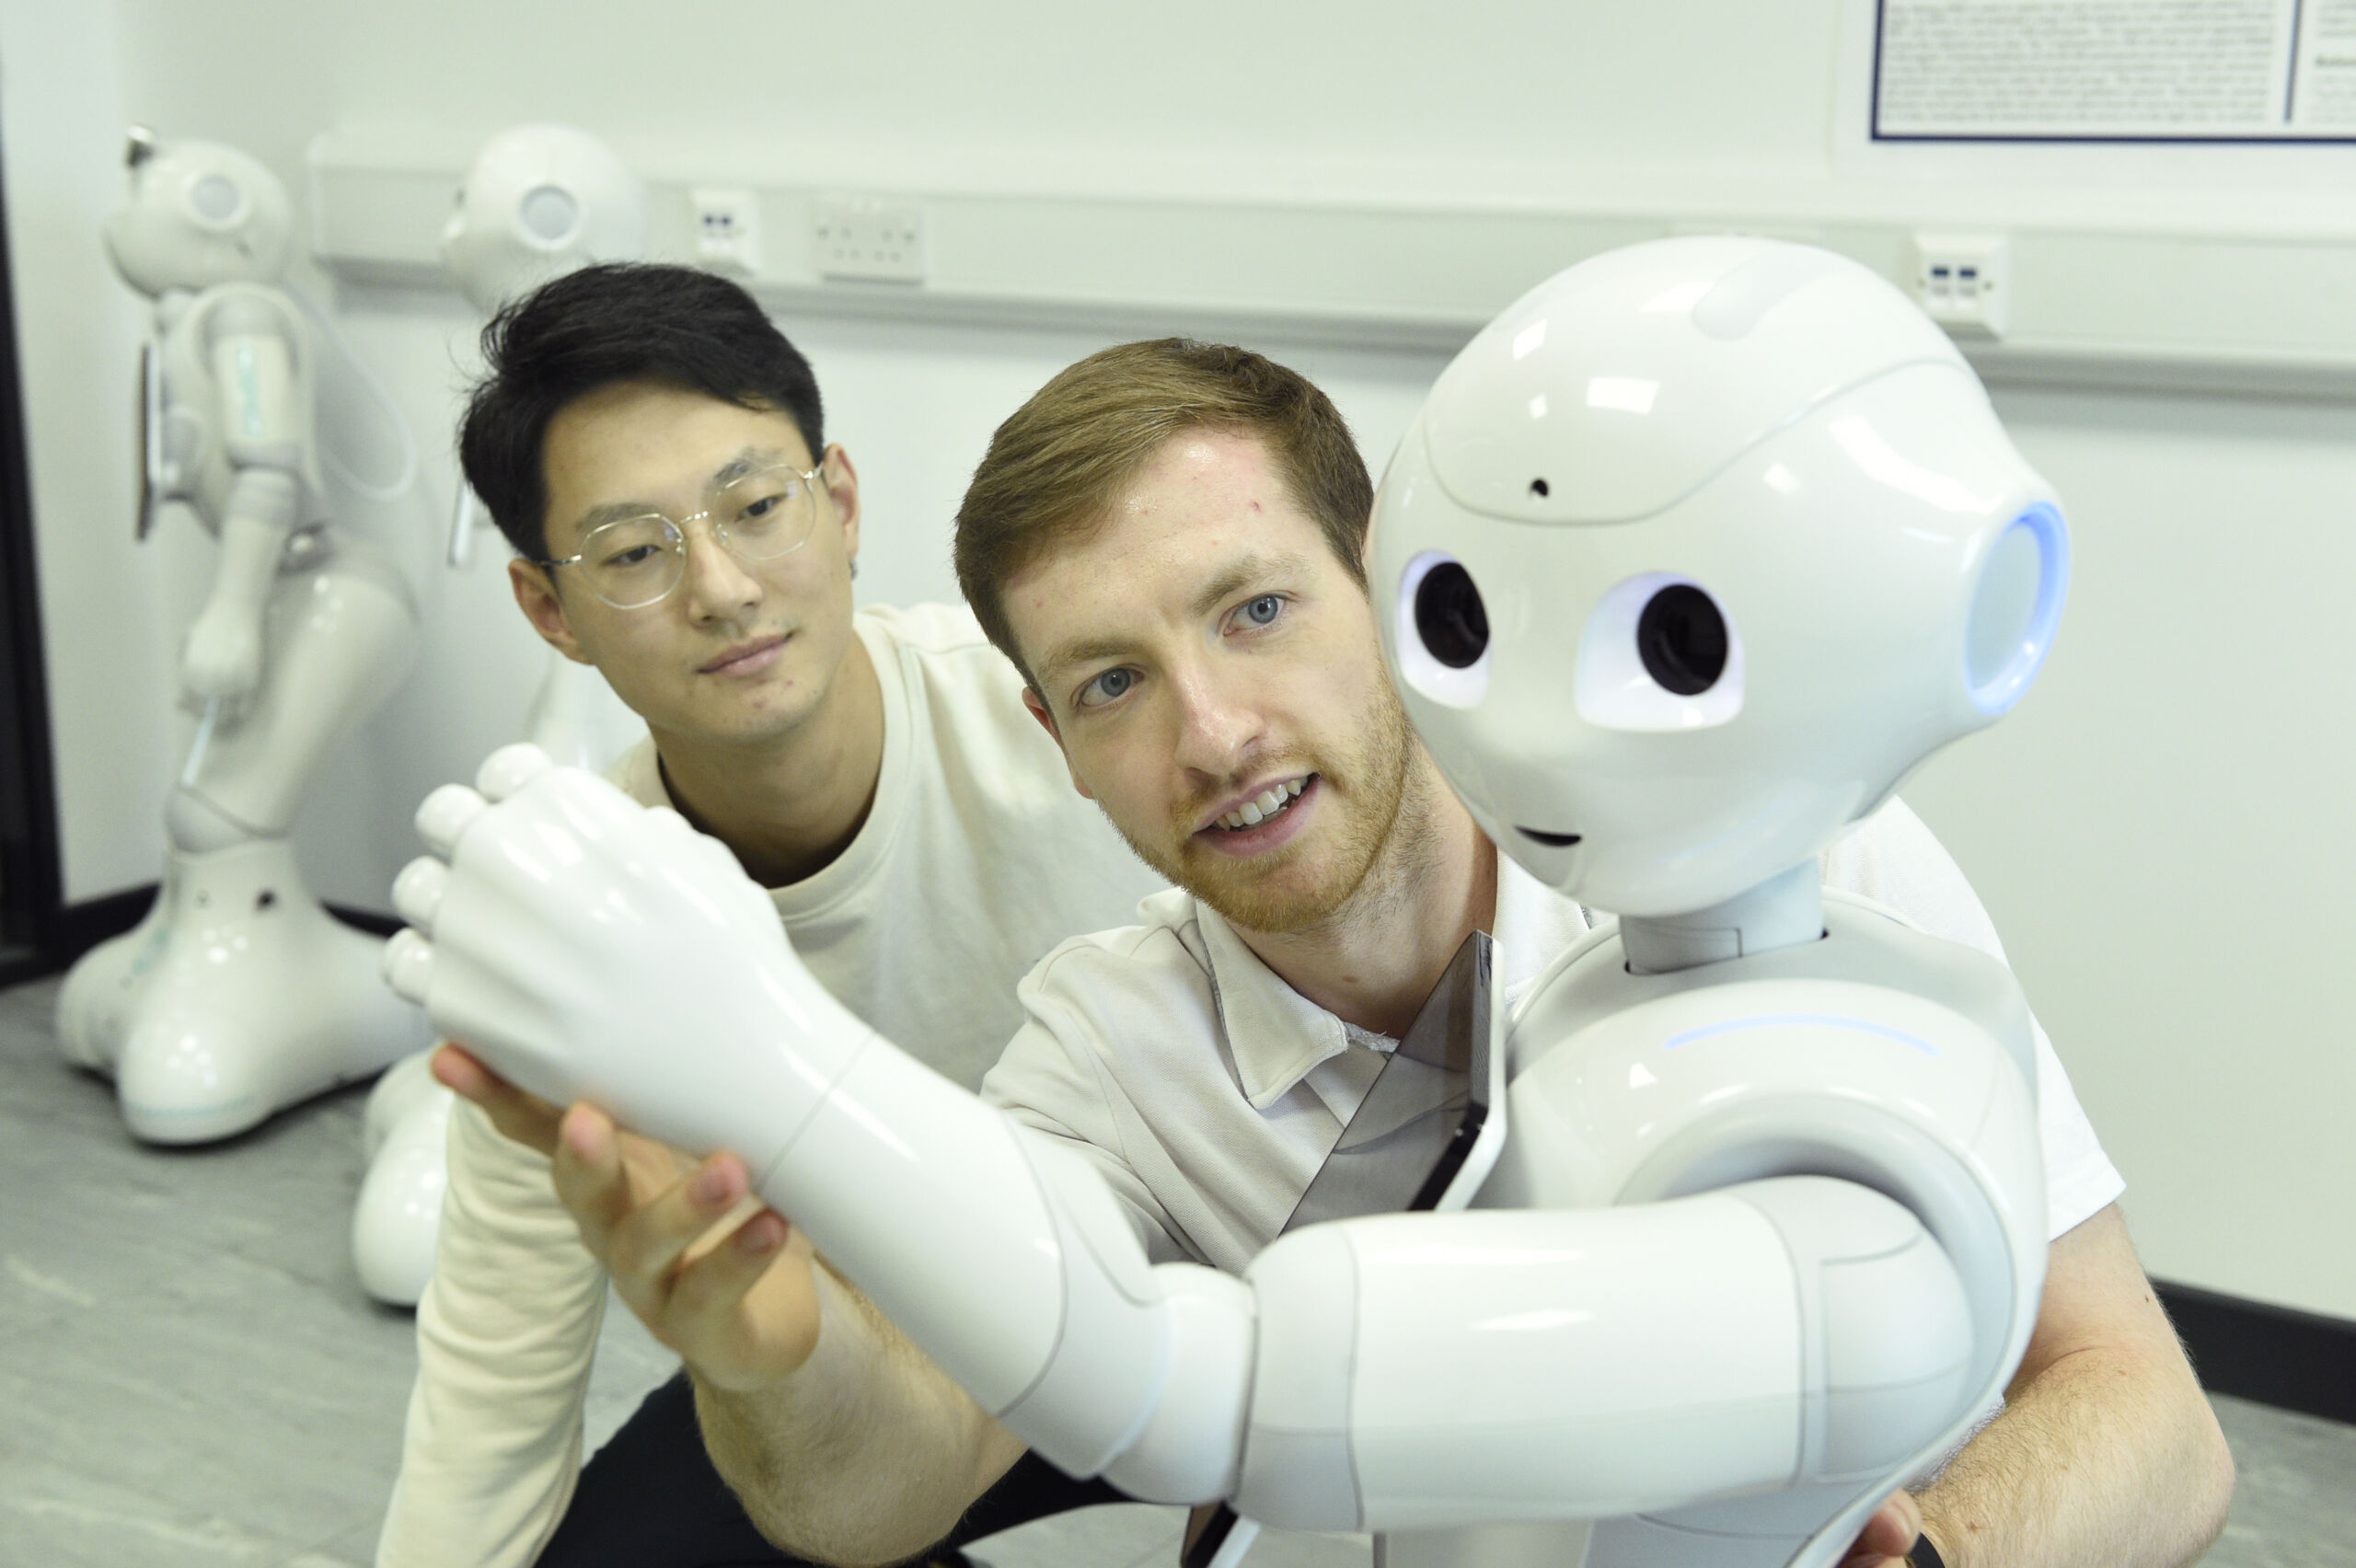 A man moves his arm to mimic a humanoid robot while another man in glasses looks on